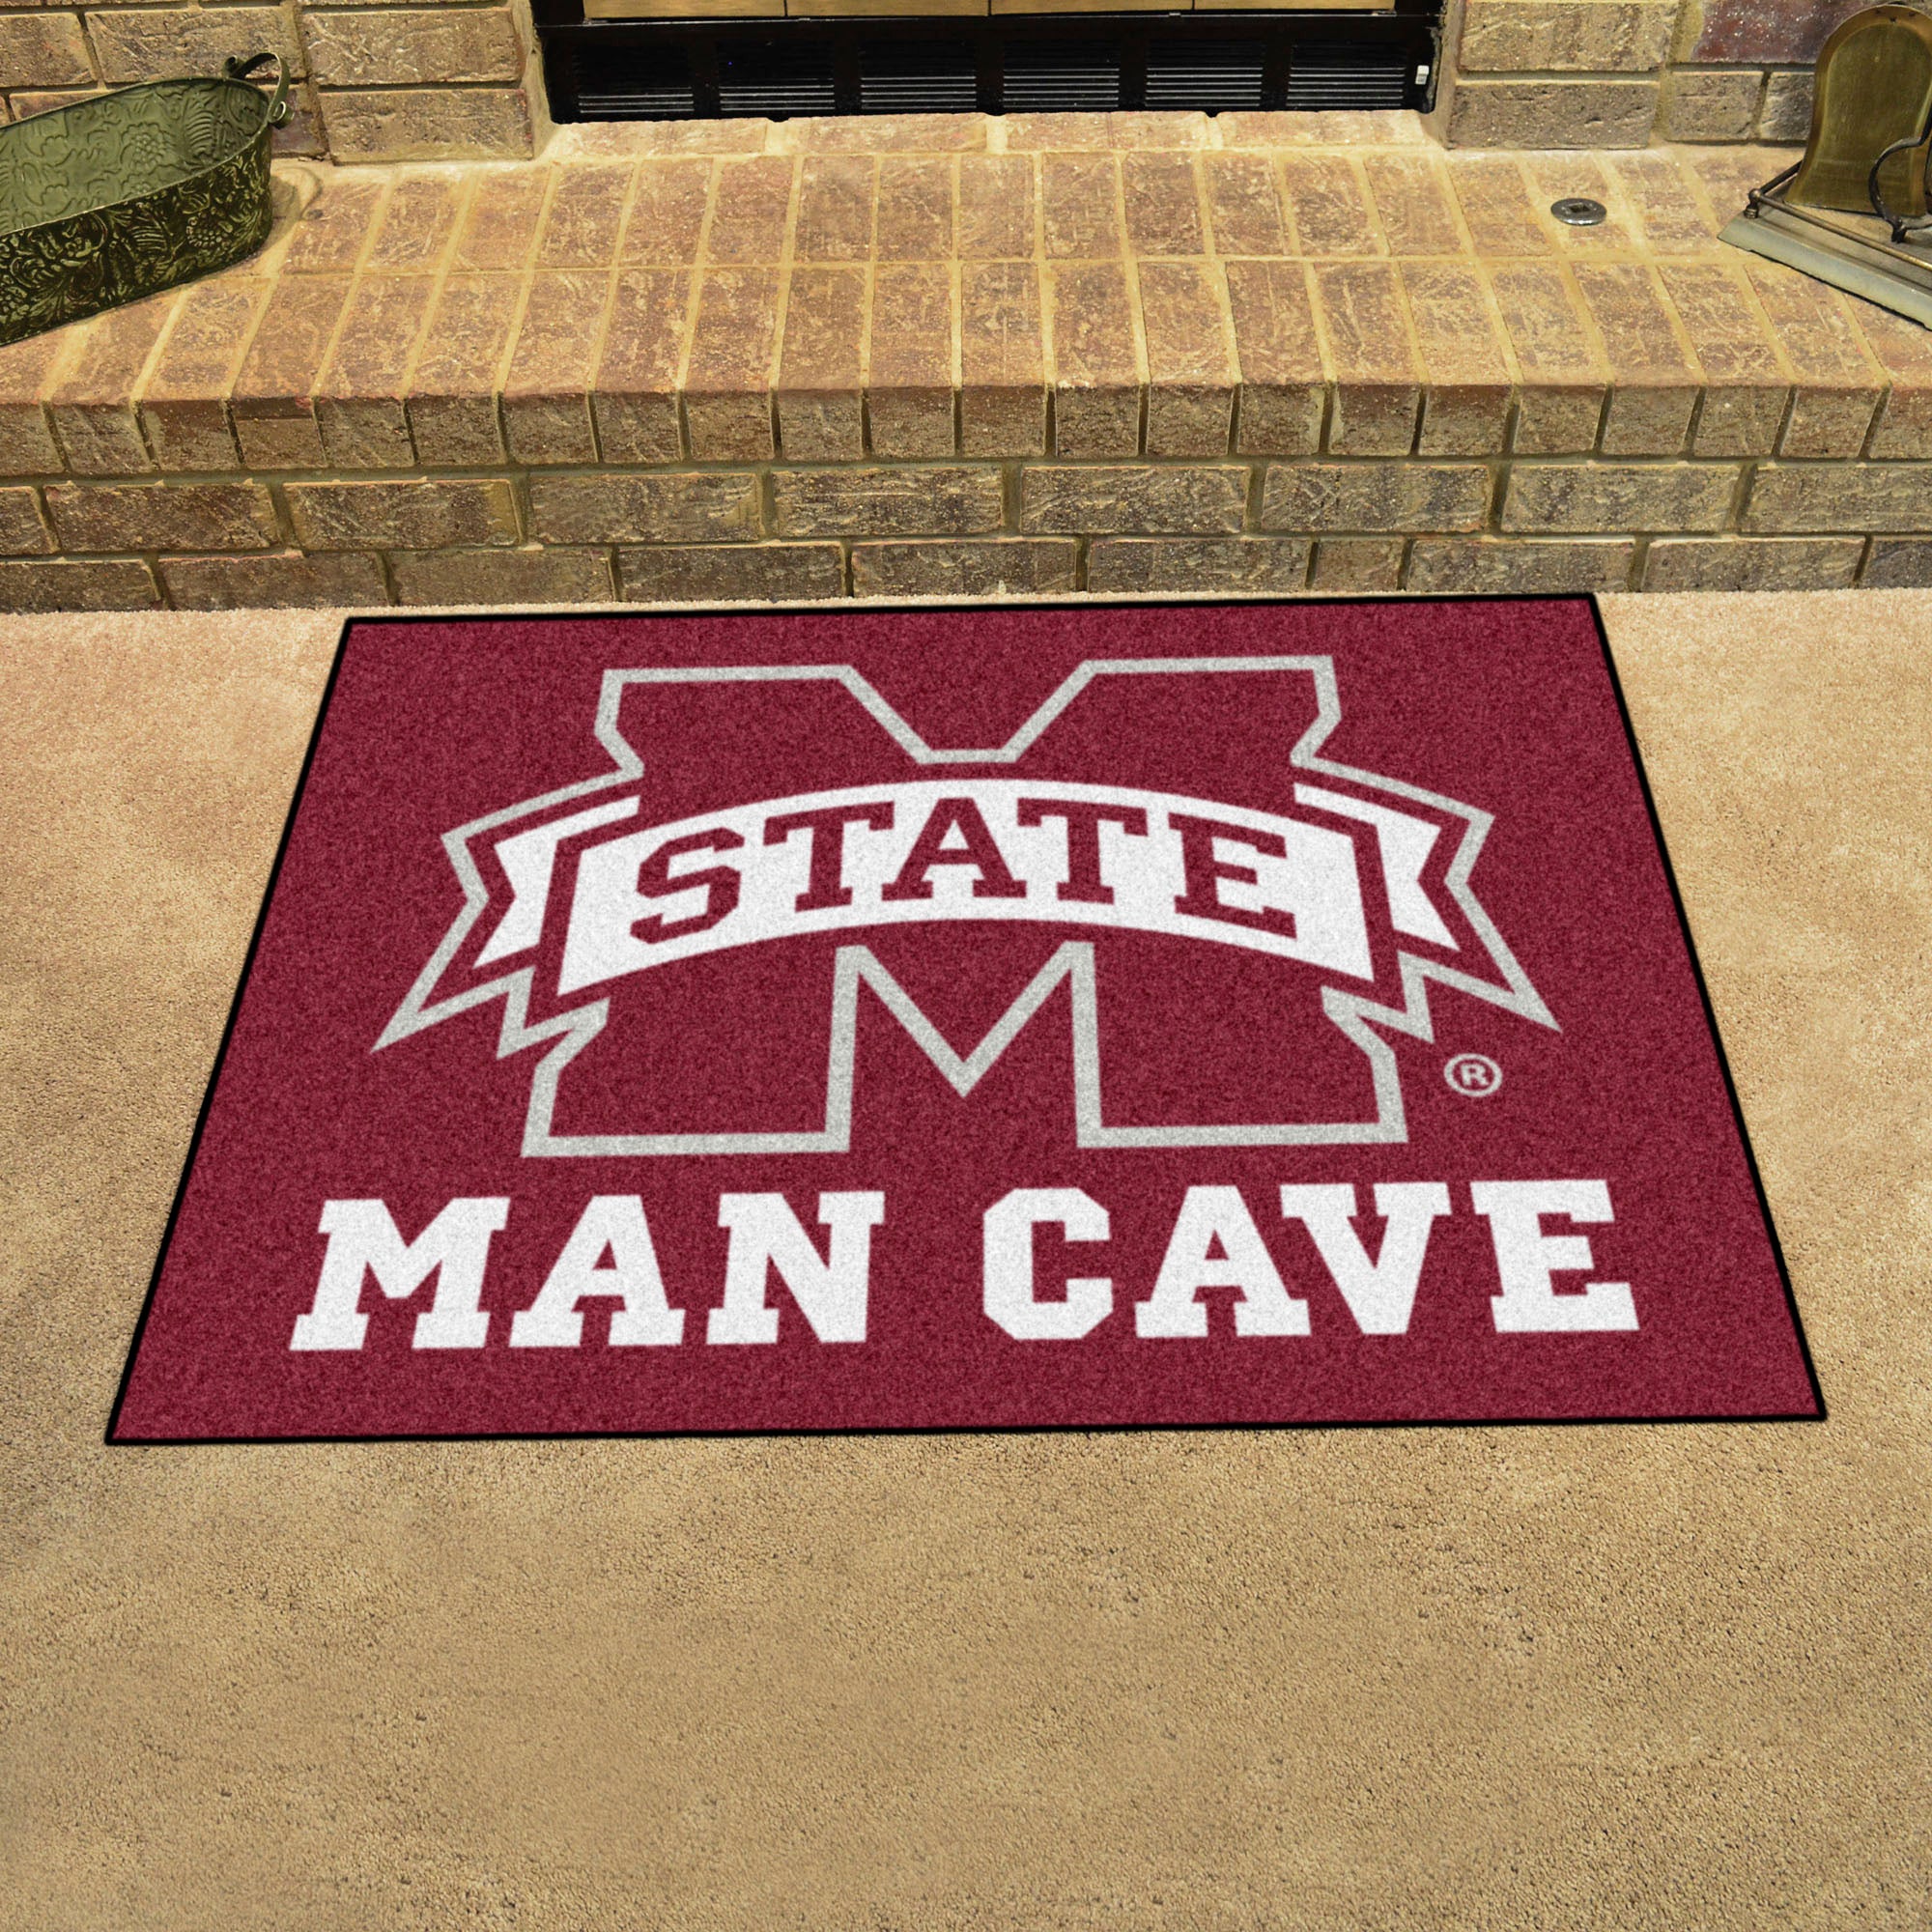 FANMATS, Mississippi State University Man Cave Rug - 34 in. x 42.5 in.